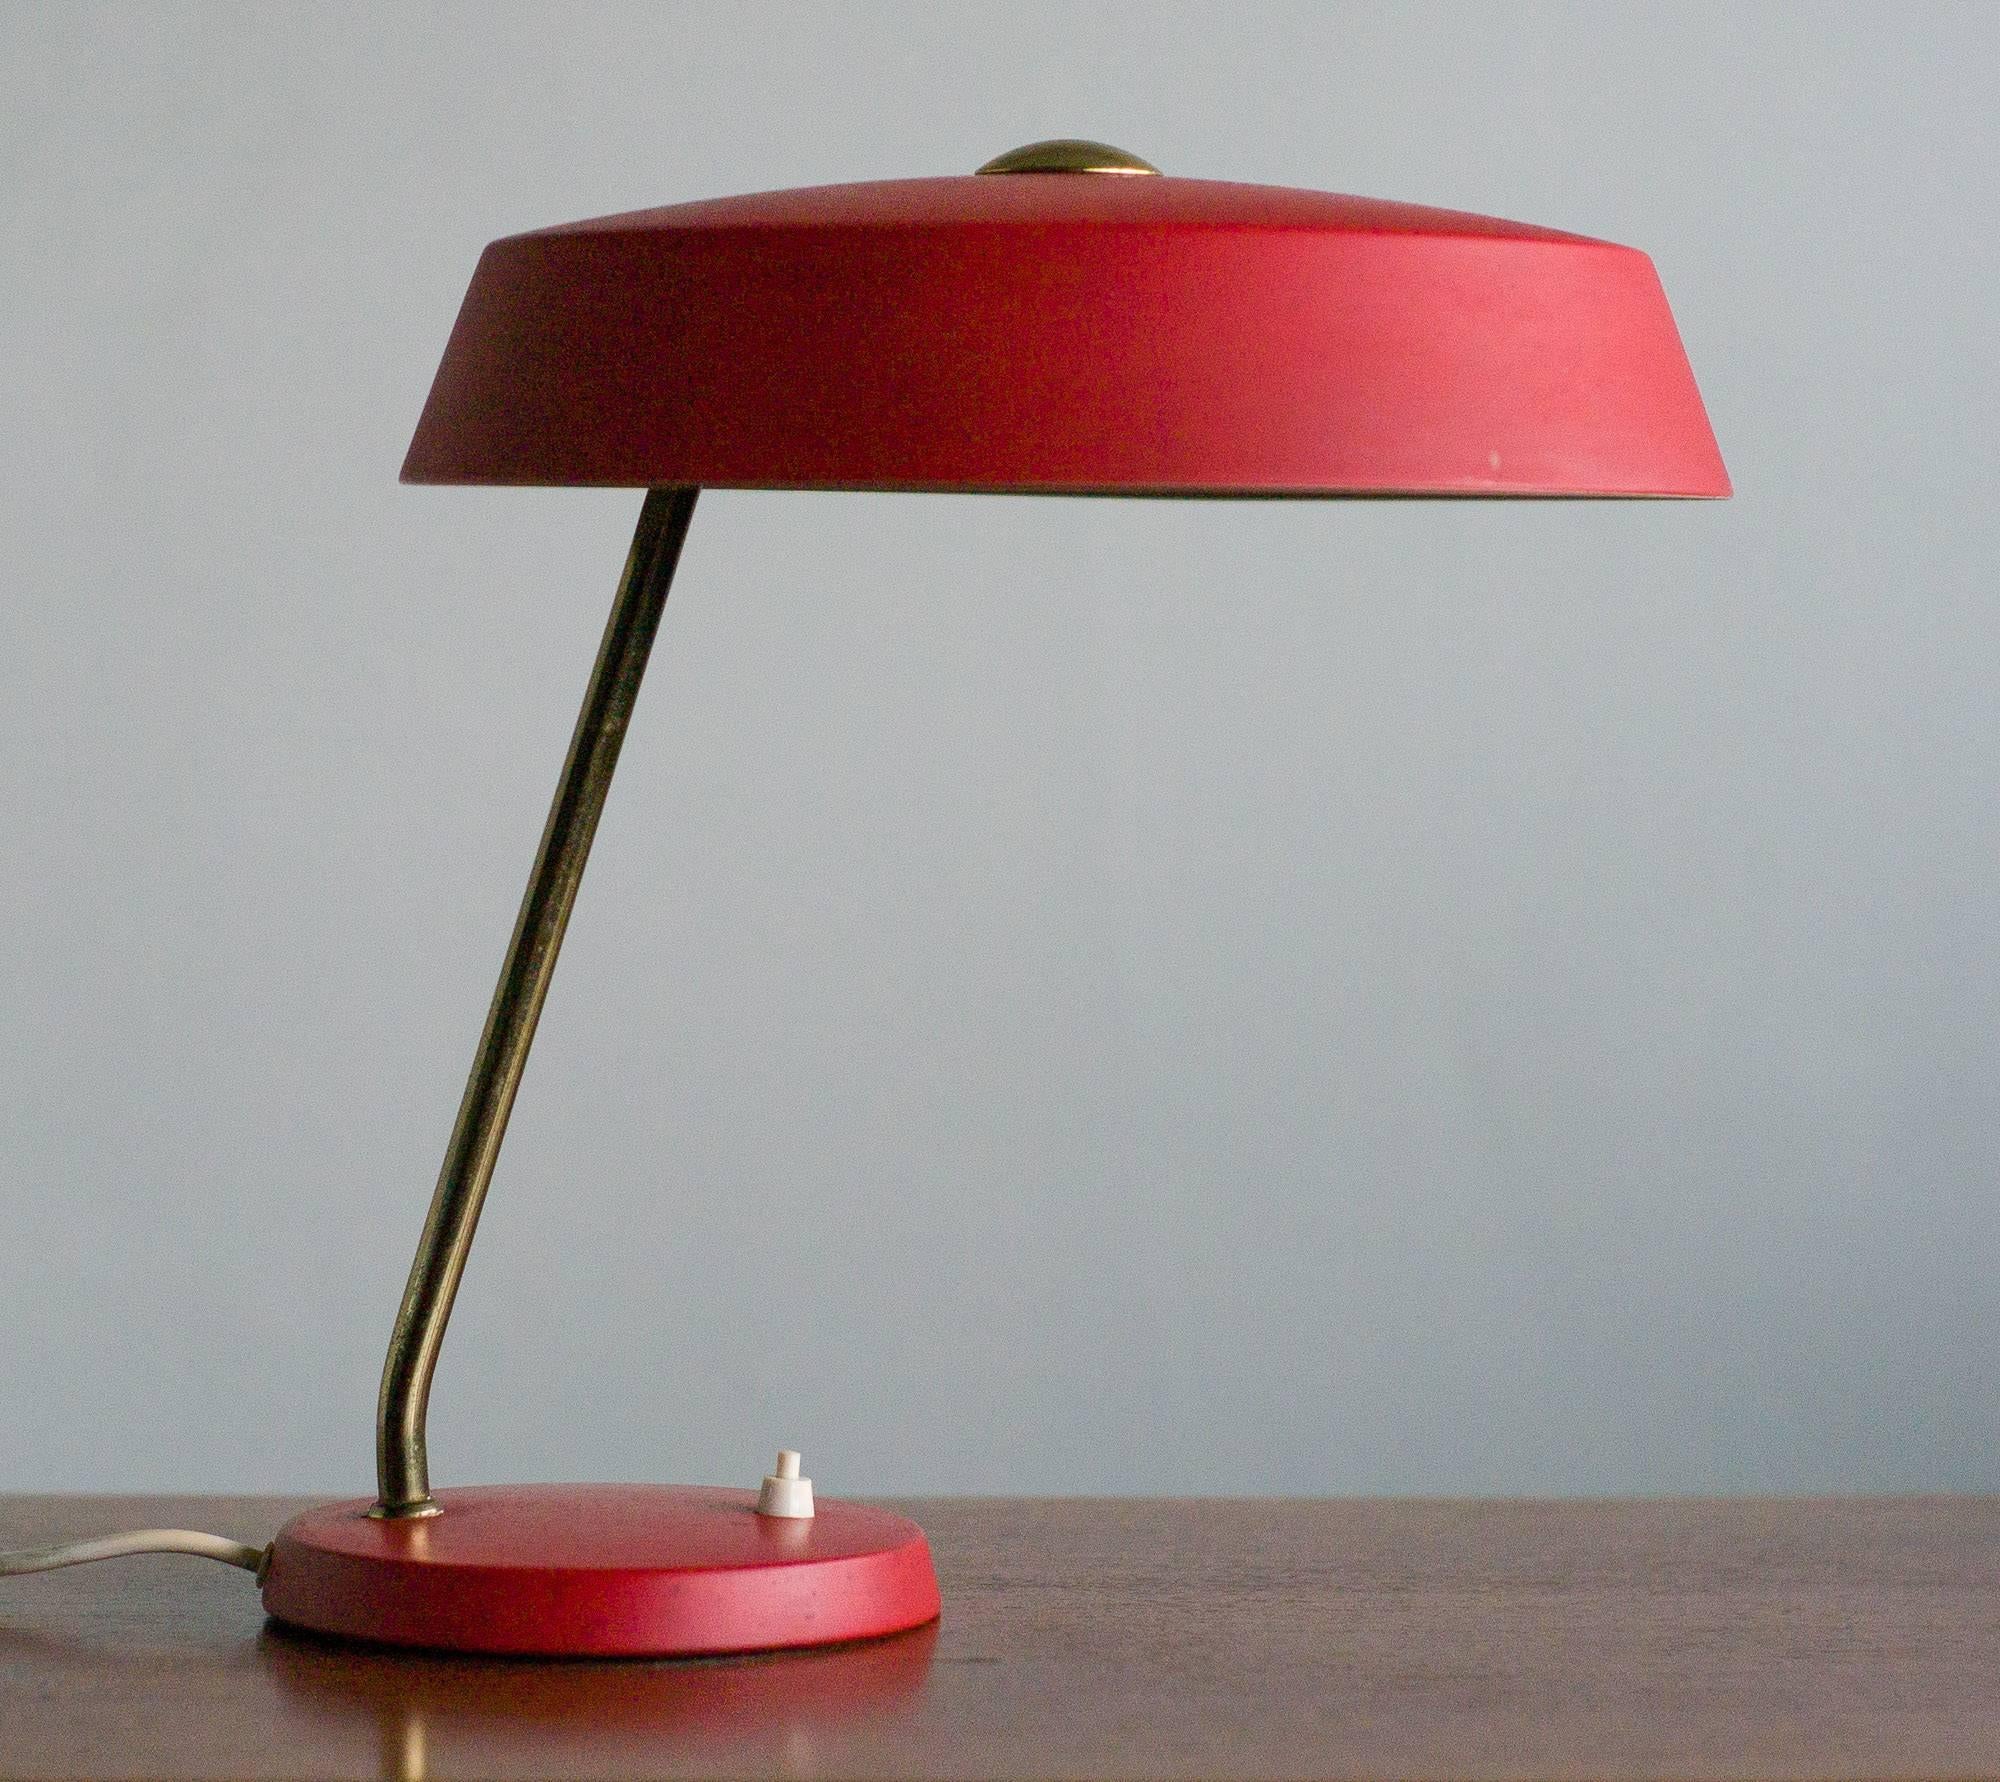 Phillips table lamp by Louis Kalff in appealing red color with brass details.
Multiple small corrosion spots on the shade and base.
Great vintage look, shade and base can easily repainted when desired.

      